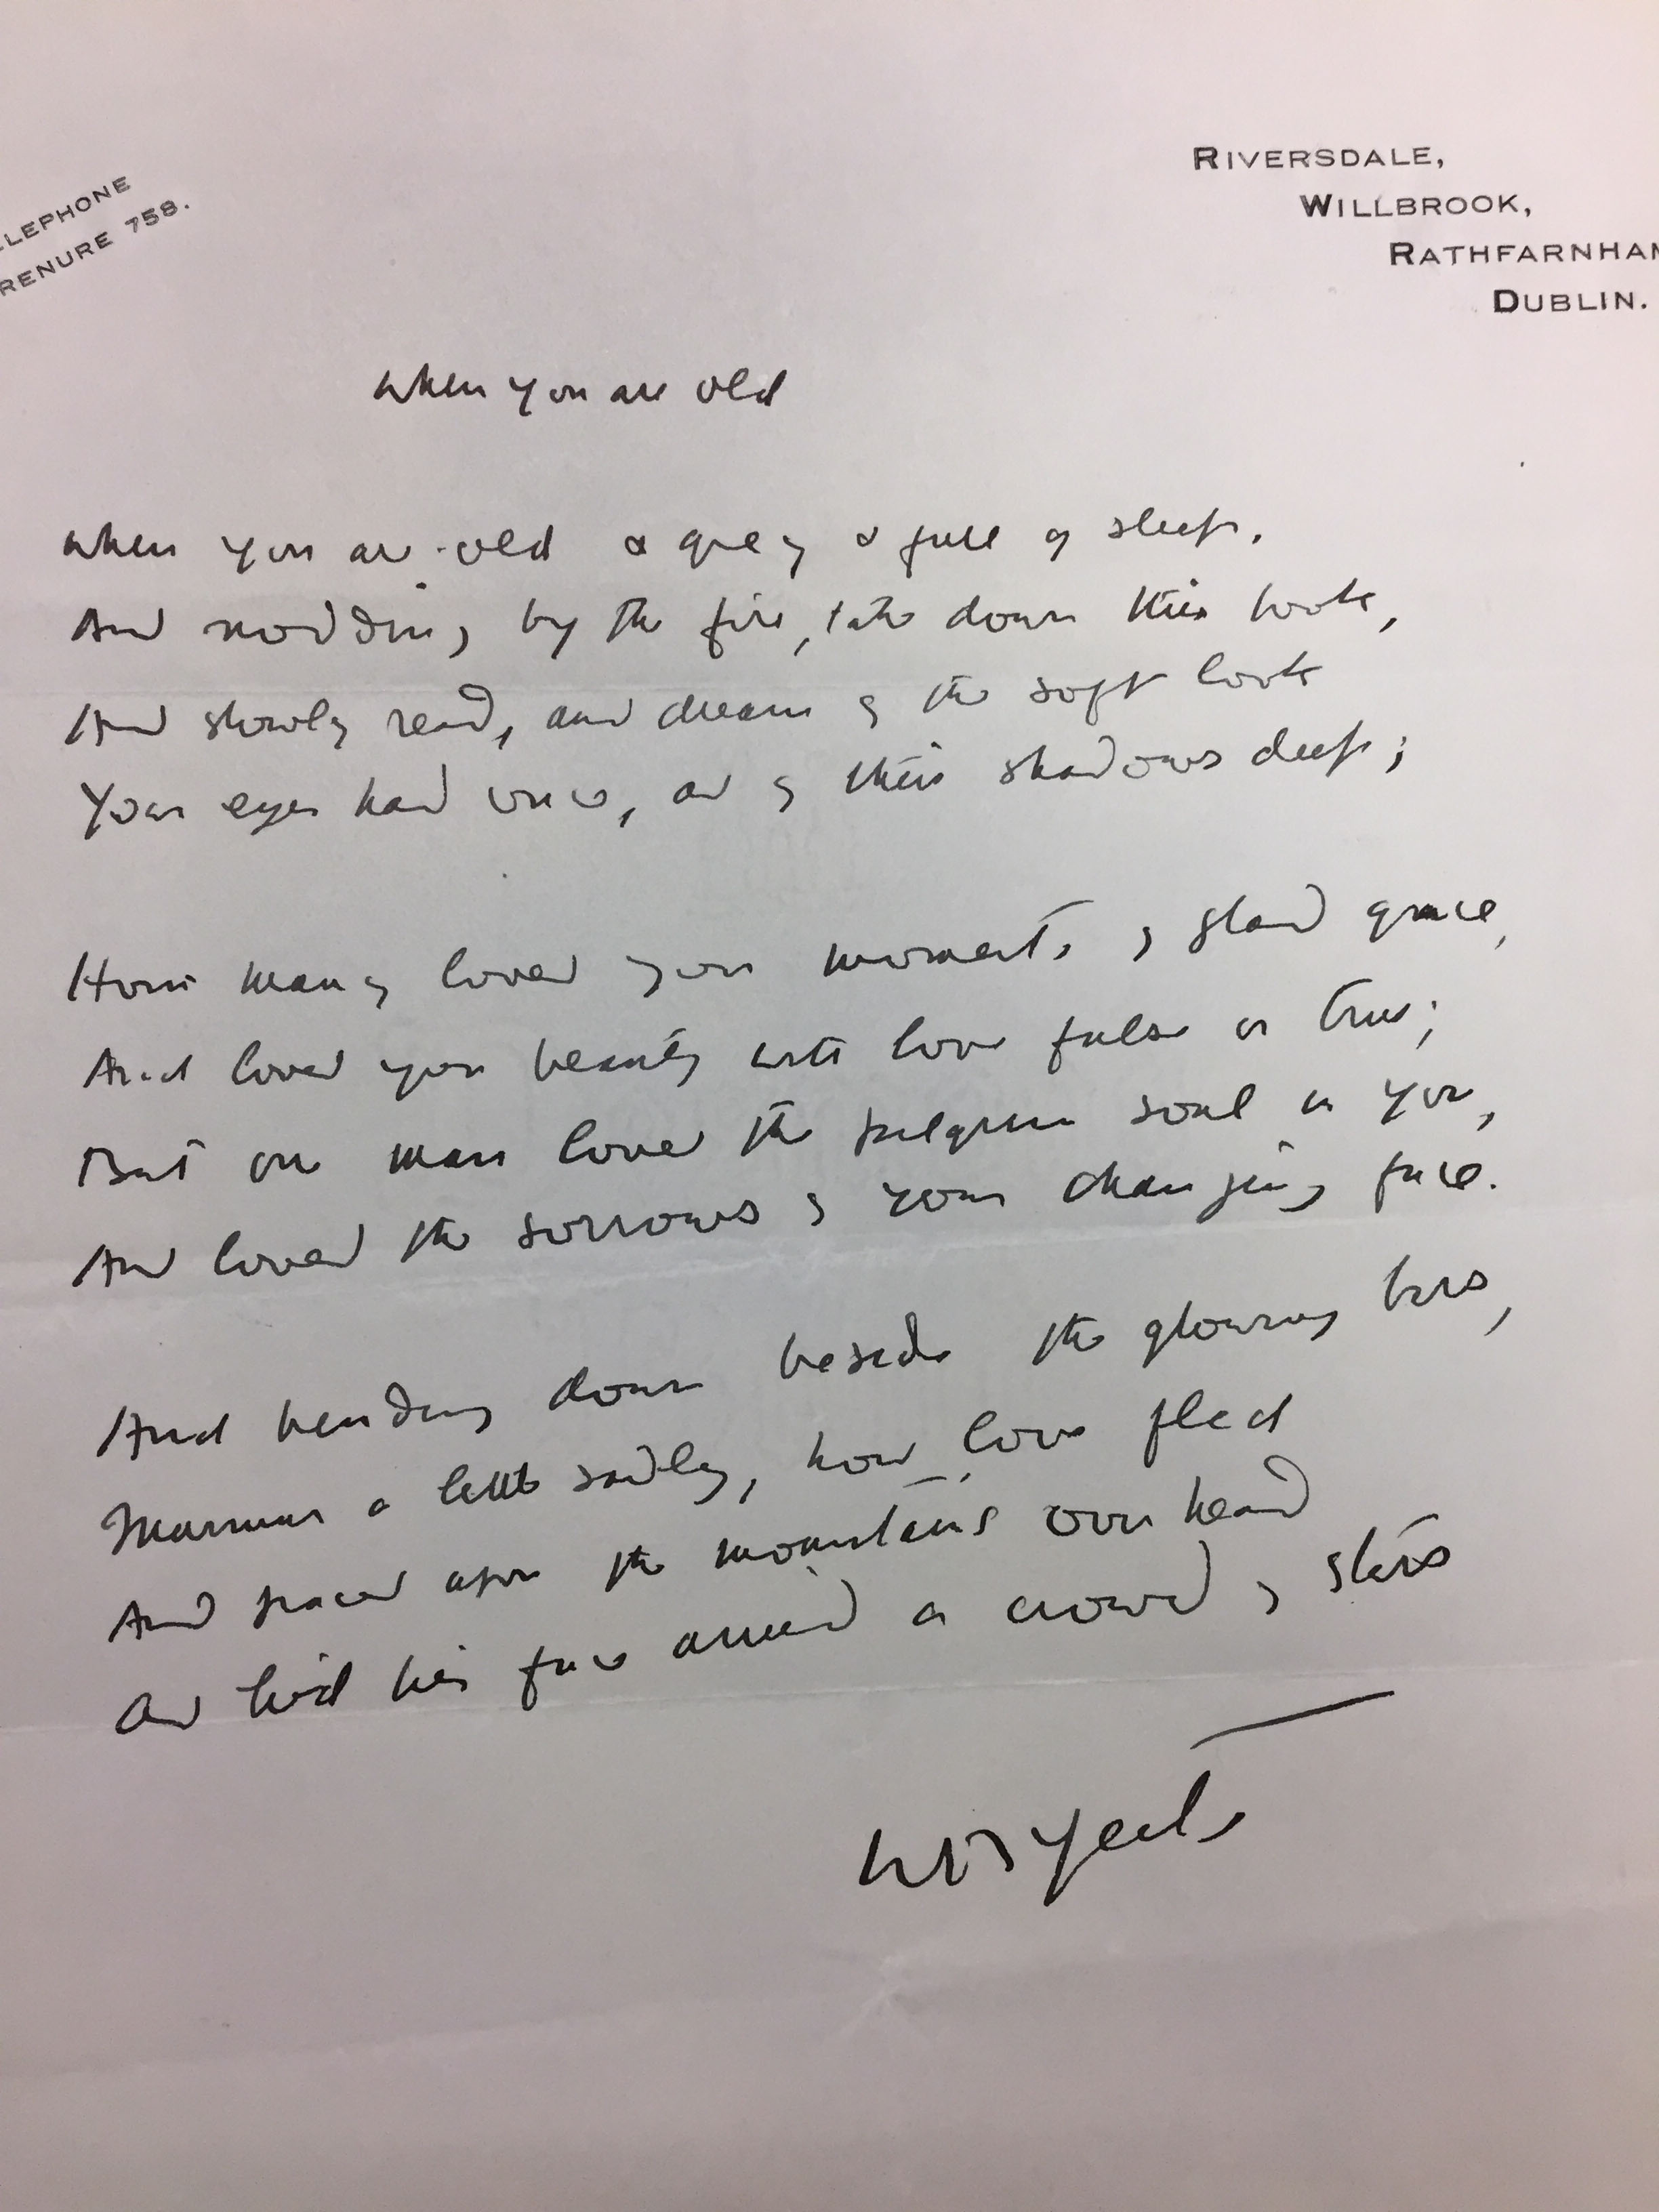 A manuscript of the poem "When You Are Old," written and signed by William Butler Yeats sometime during the 1930s, per the printed address. (MSS 4243)